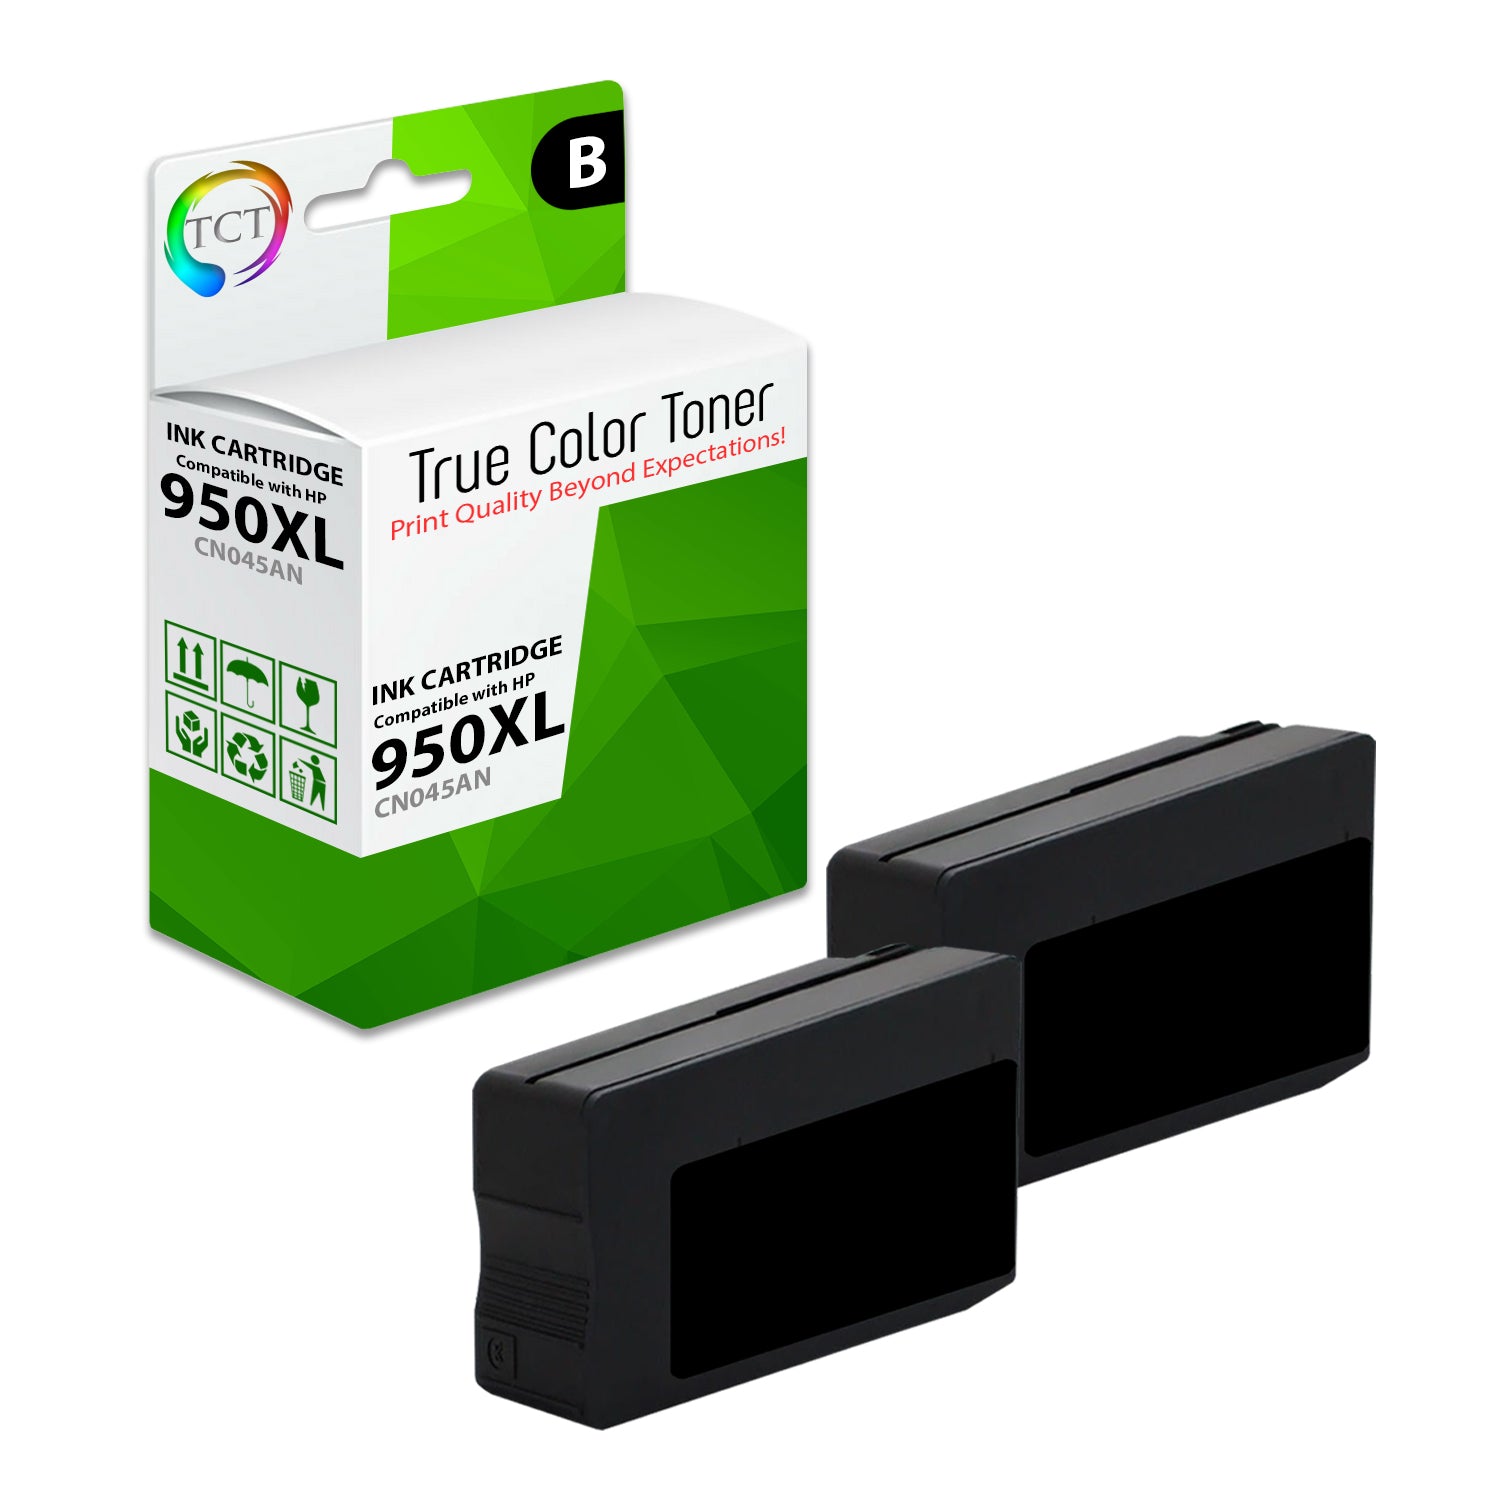 TCT Compatible Ink Cartridge Replacement for the HP 950XL Series - 2 Pack Black